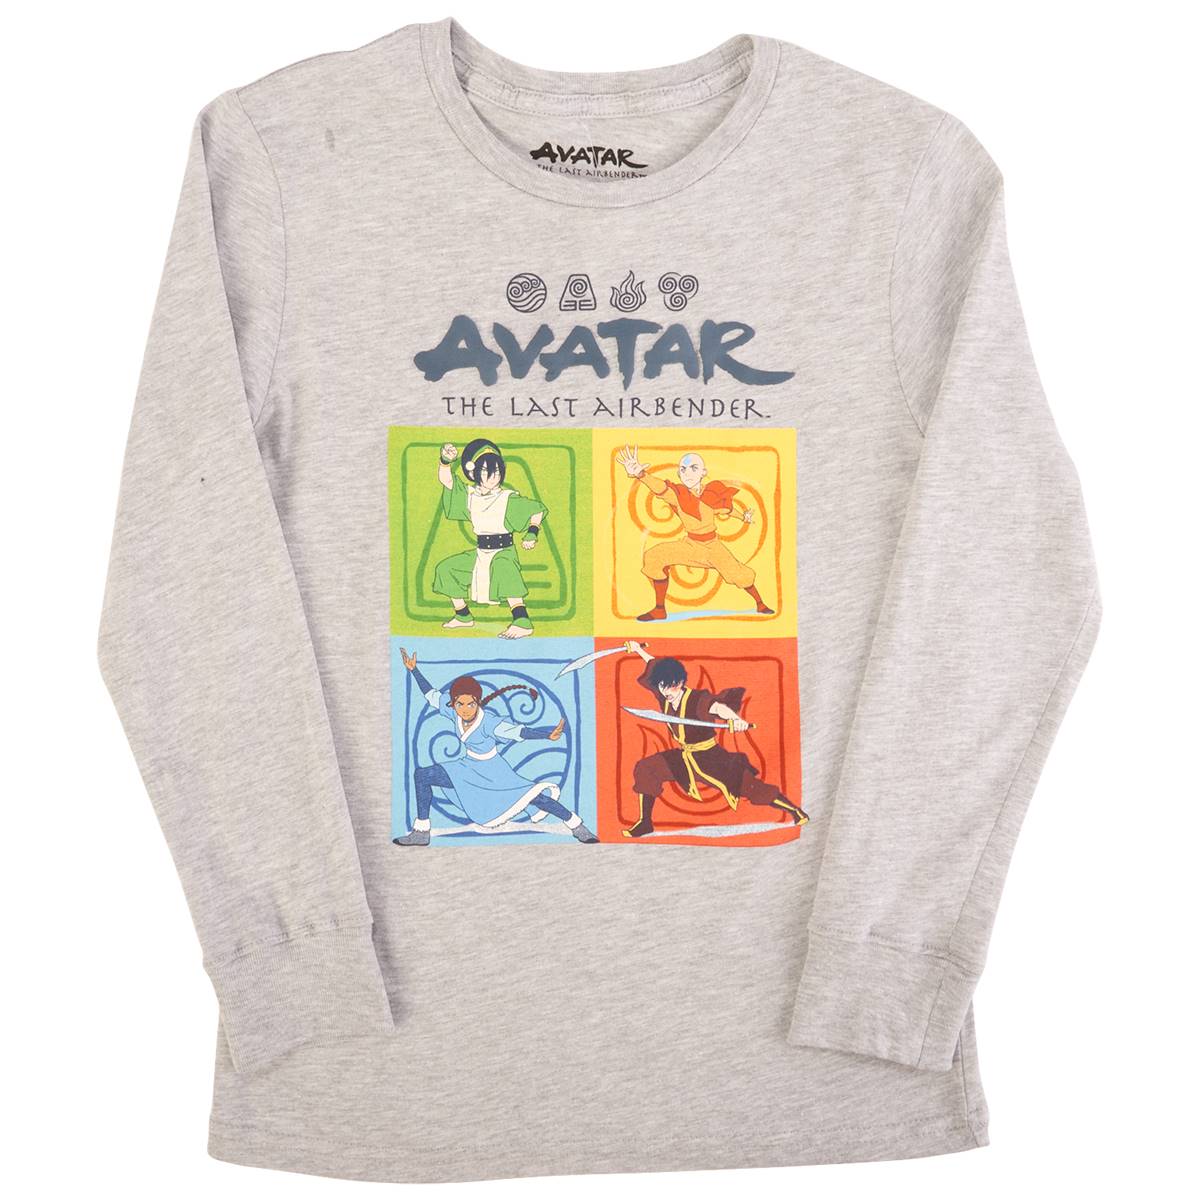 Boys (8-20) Long Sleeve Four Square Avatar Graphic Tee